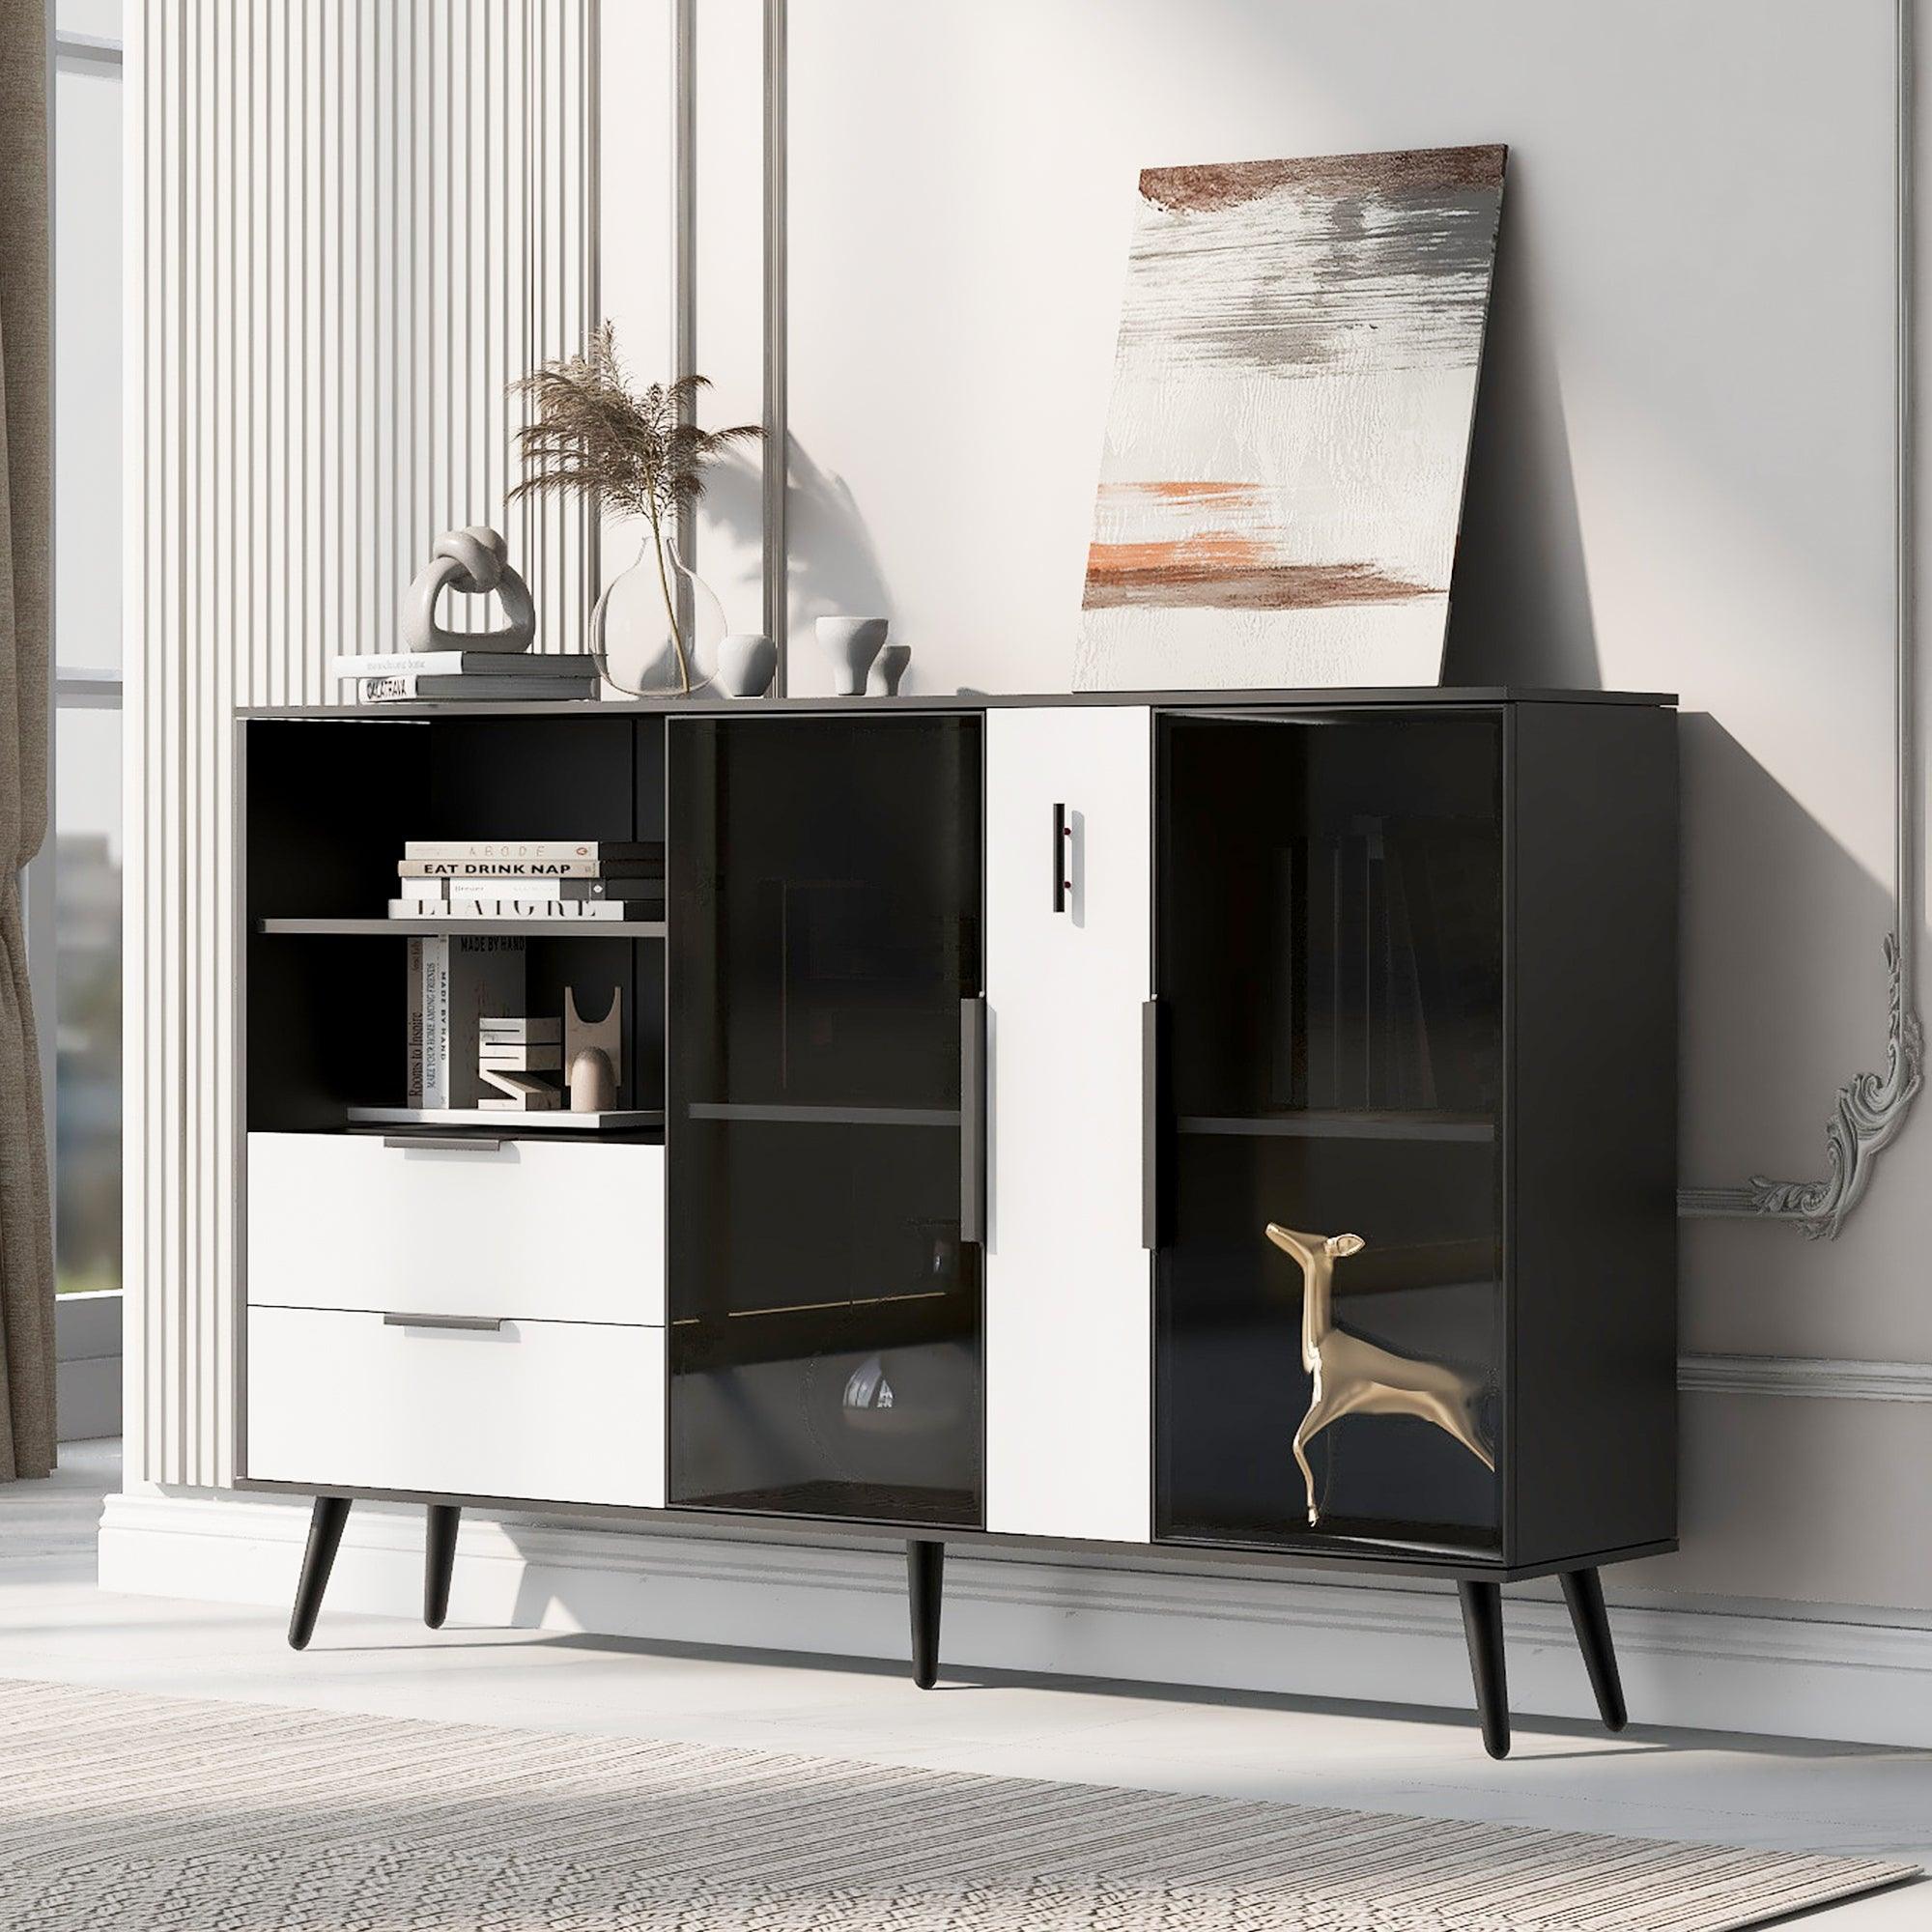 🆓🚛 Featured Two-Door Storage Cabinet With Two Drawers & Metal Handles, Suitable for Corridors, Entrances, Living Rooms, & Bedrooms